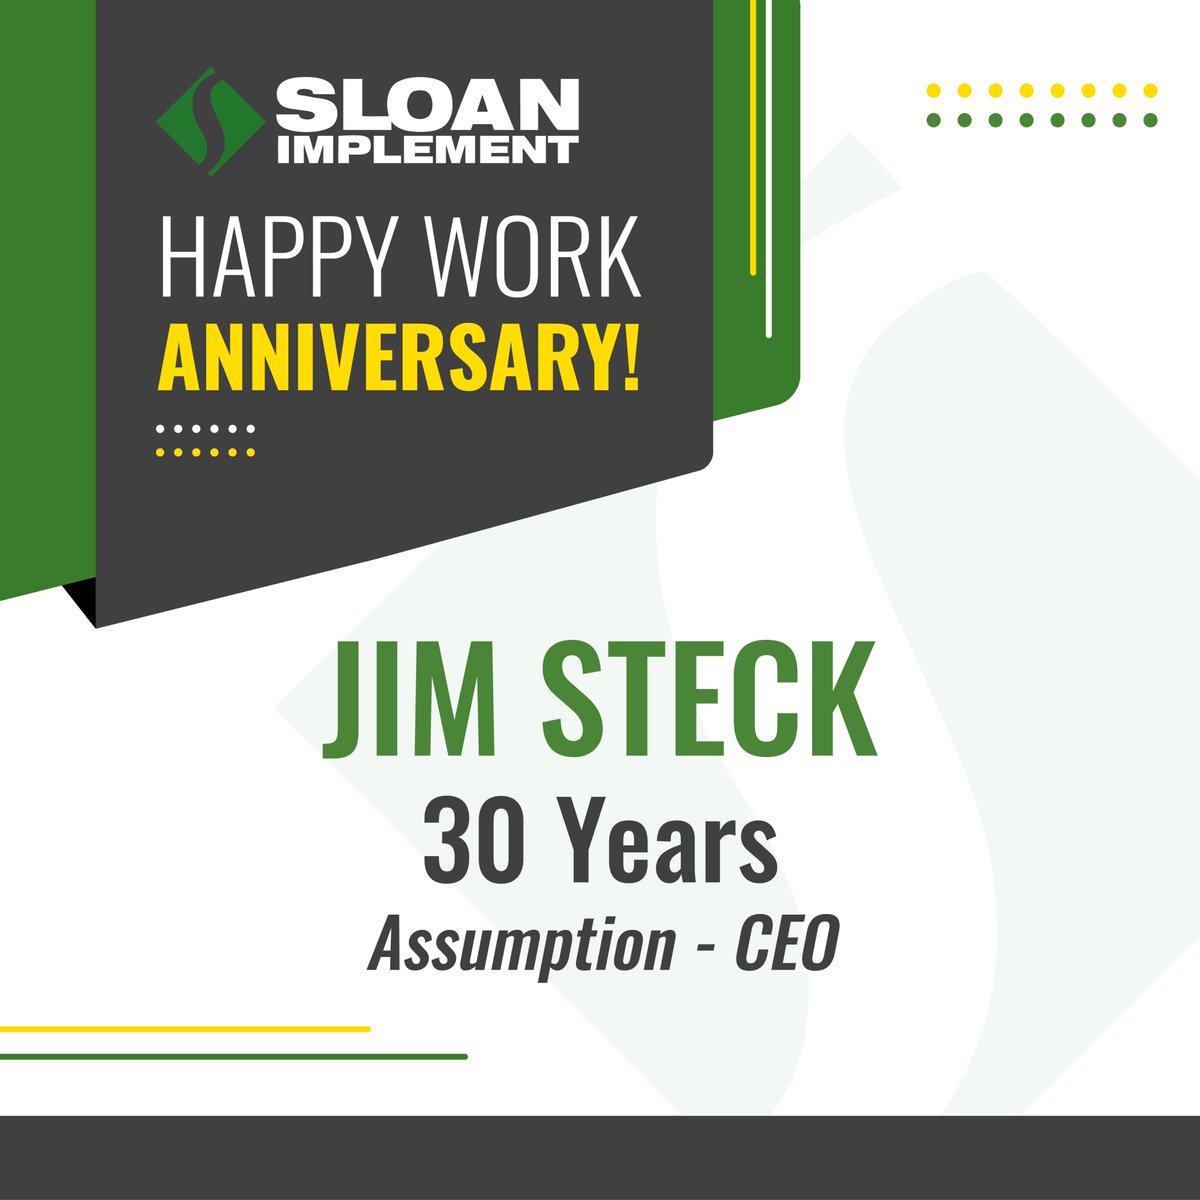 Happy Anniversary to Jim Steck! Jim worked for John Deere in the Industrial Division before starting with us. In 1994, Tom Sloan recruited him to come work for Sloan Implement and he is still with us today as our CEO. 🦅Thank you for your 30 years of dedication and loyalty! 👏